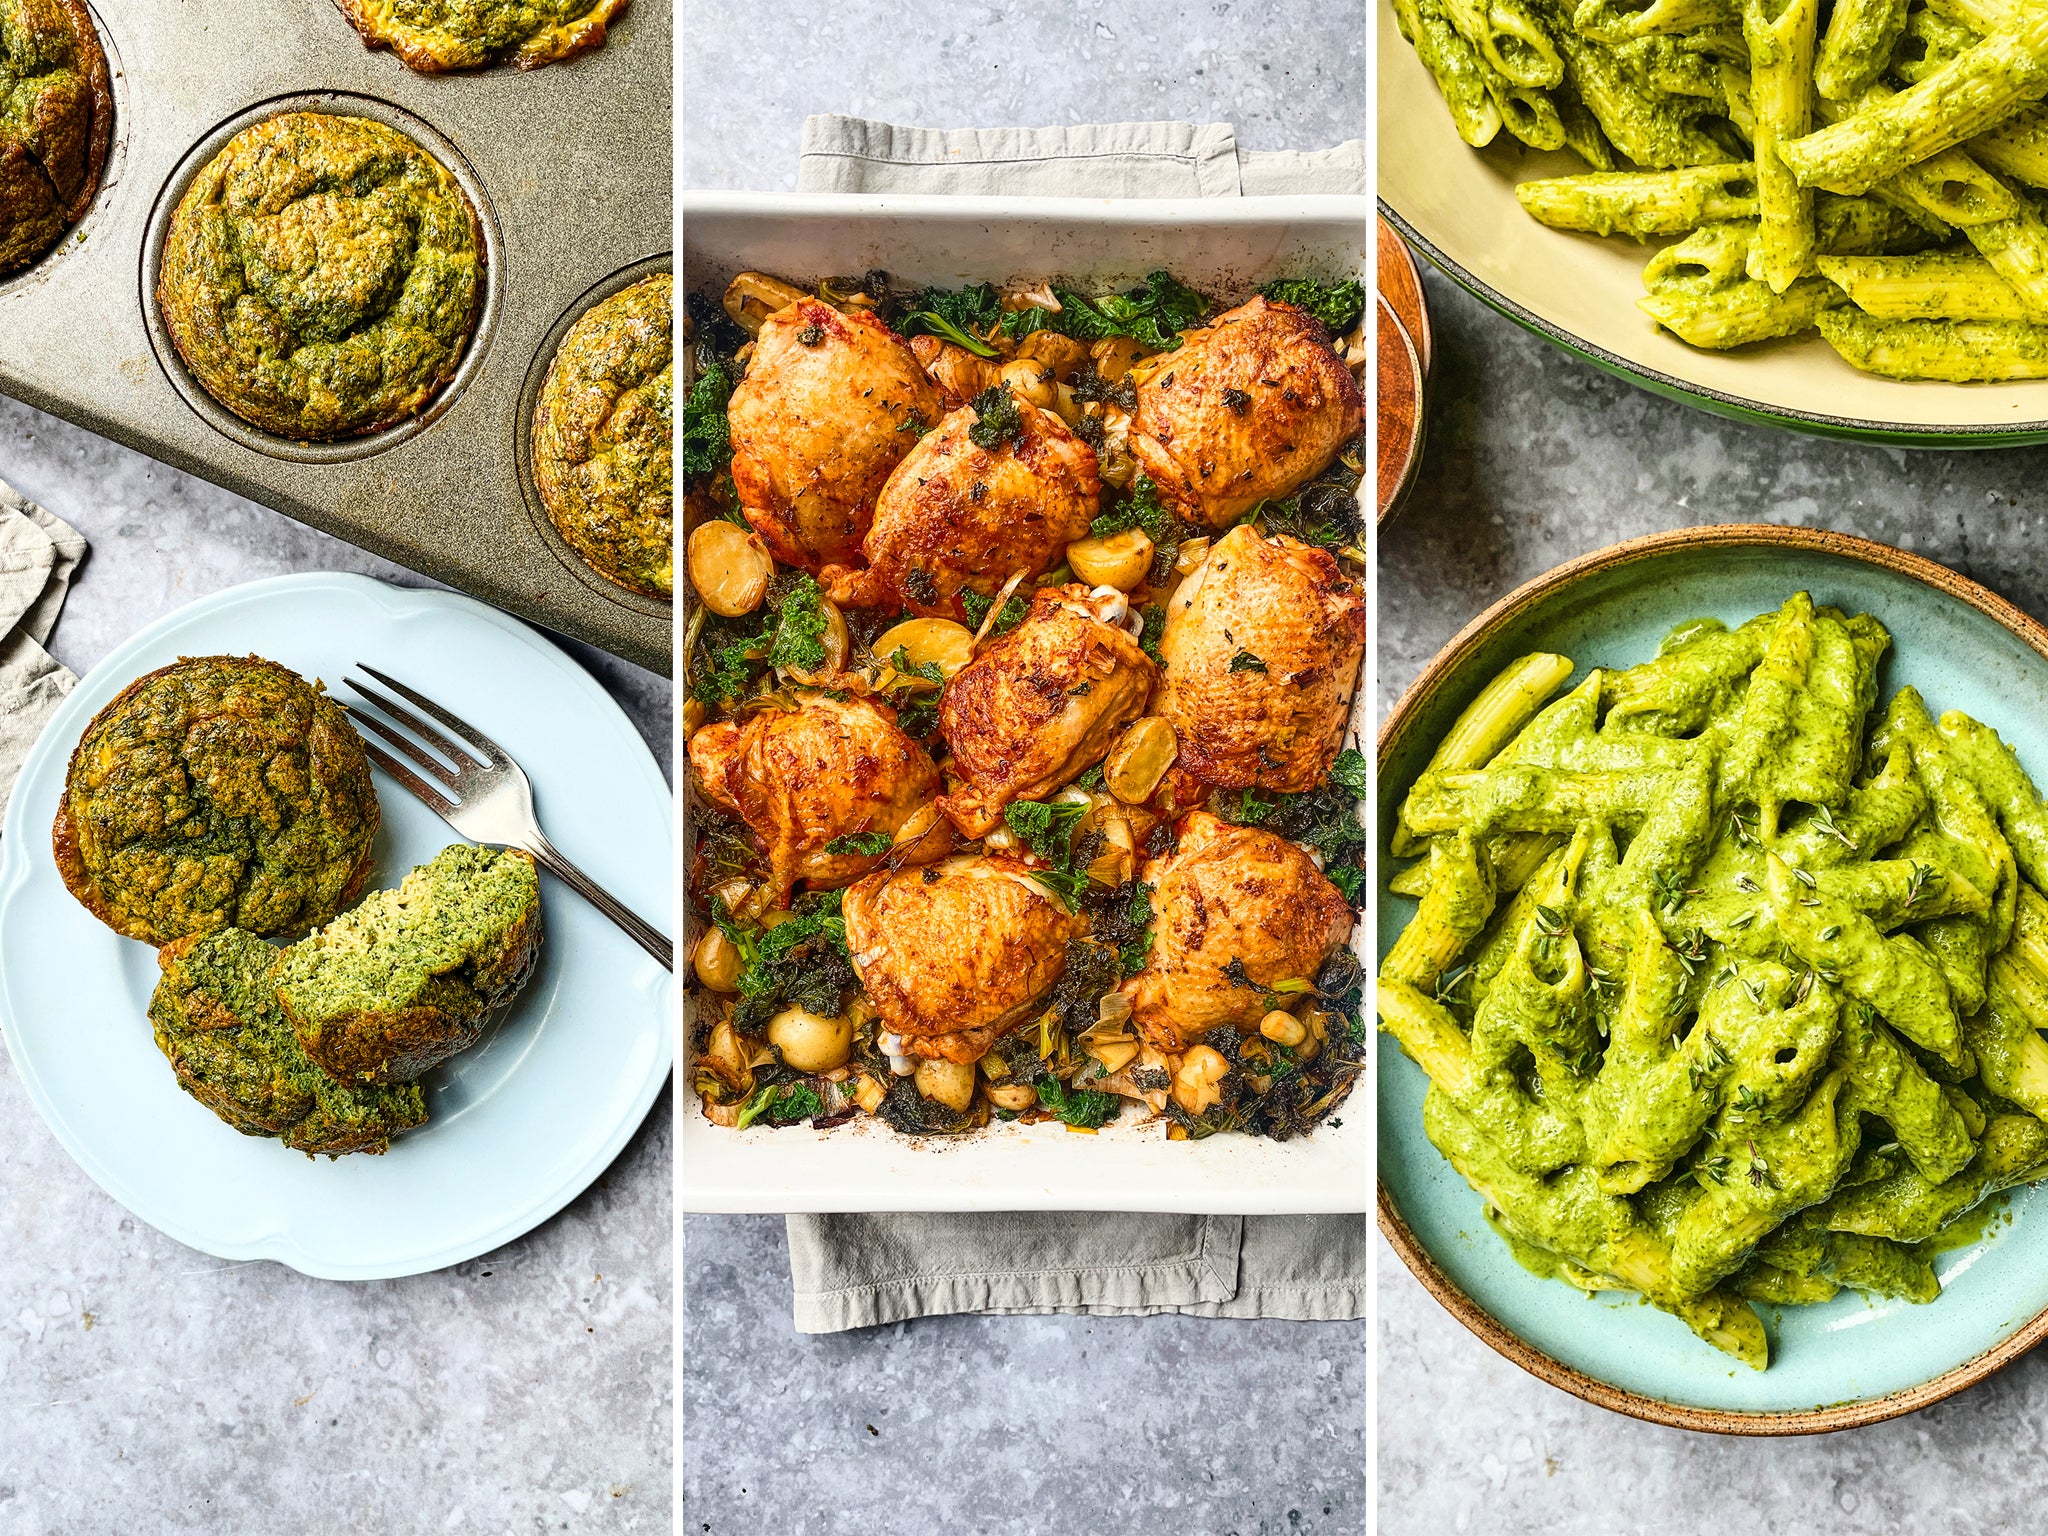 Each of these recipes contain 30 per cent of your recommended daily folate intake